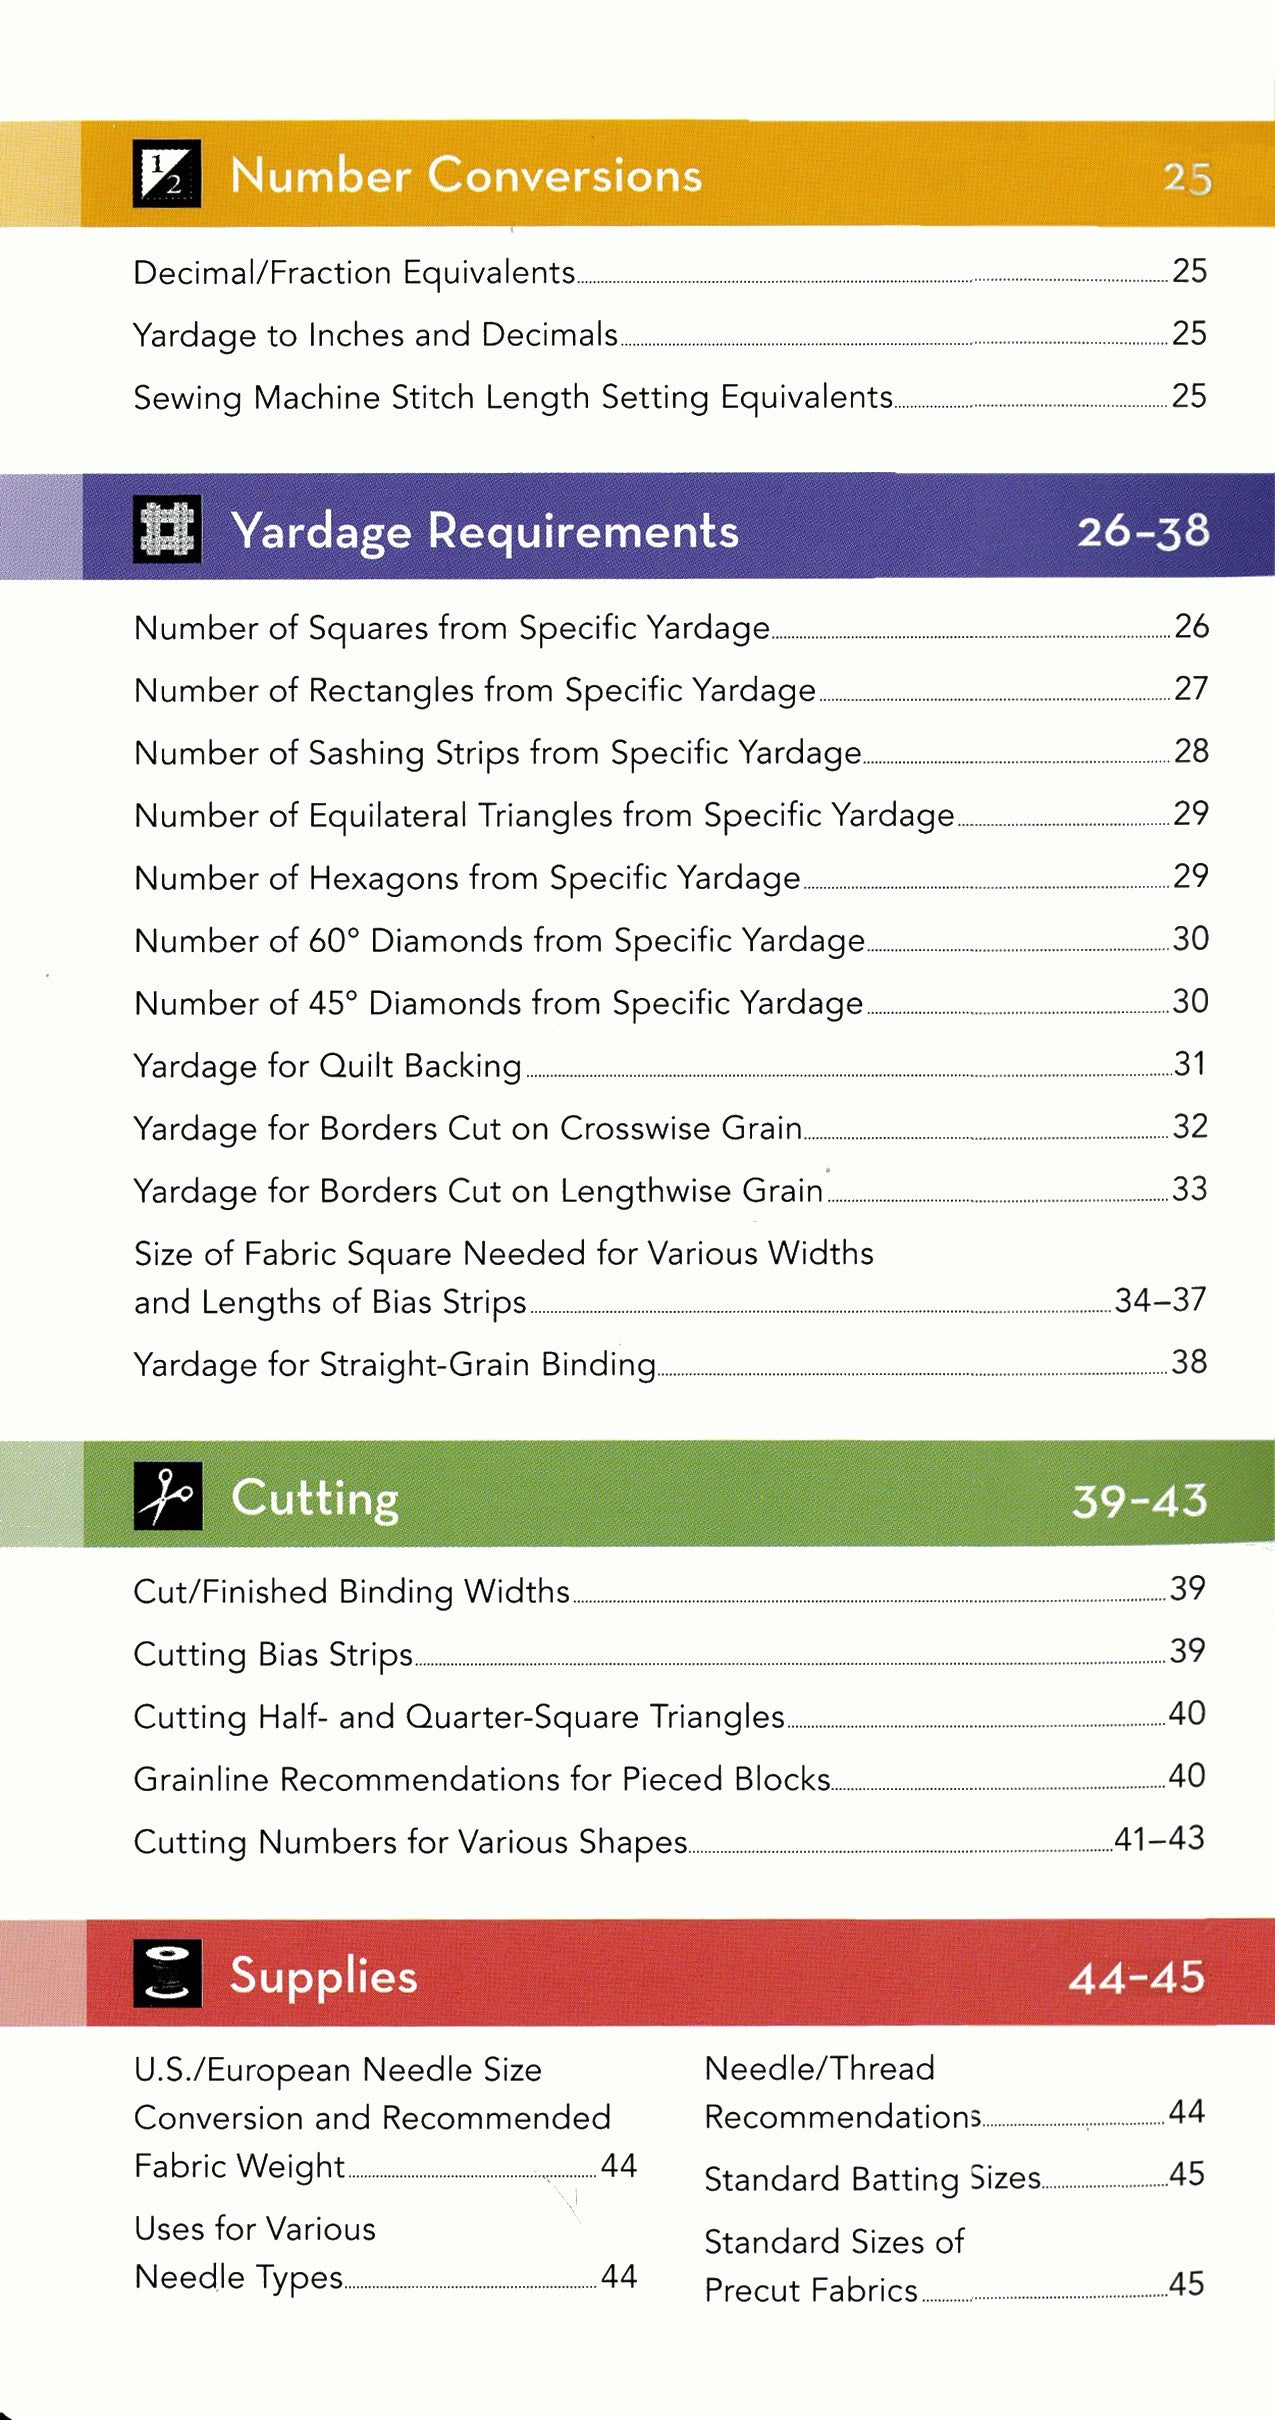 All-In-One Quilter's Reference Tool - Second Edition